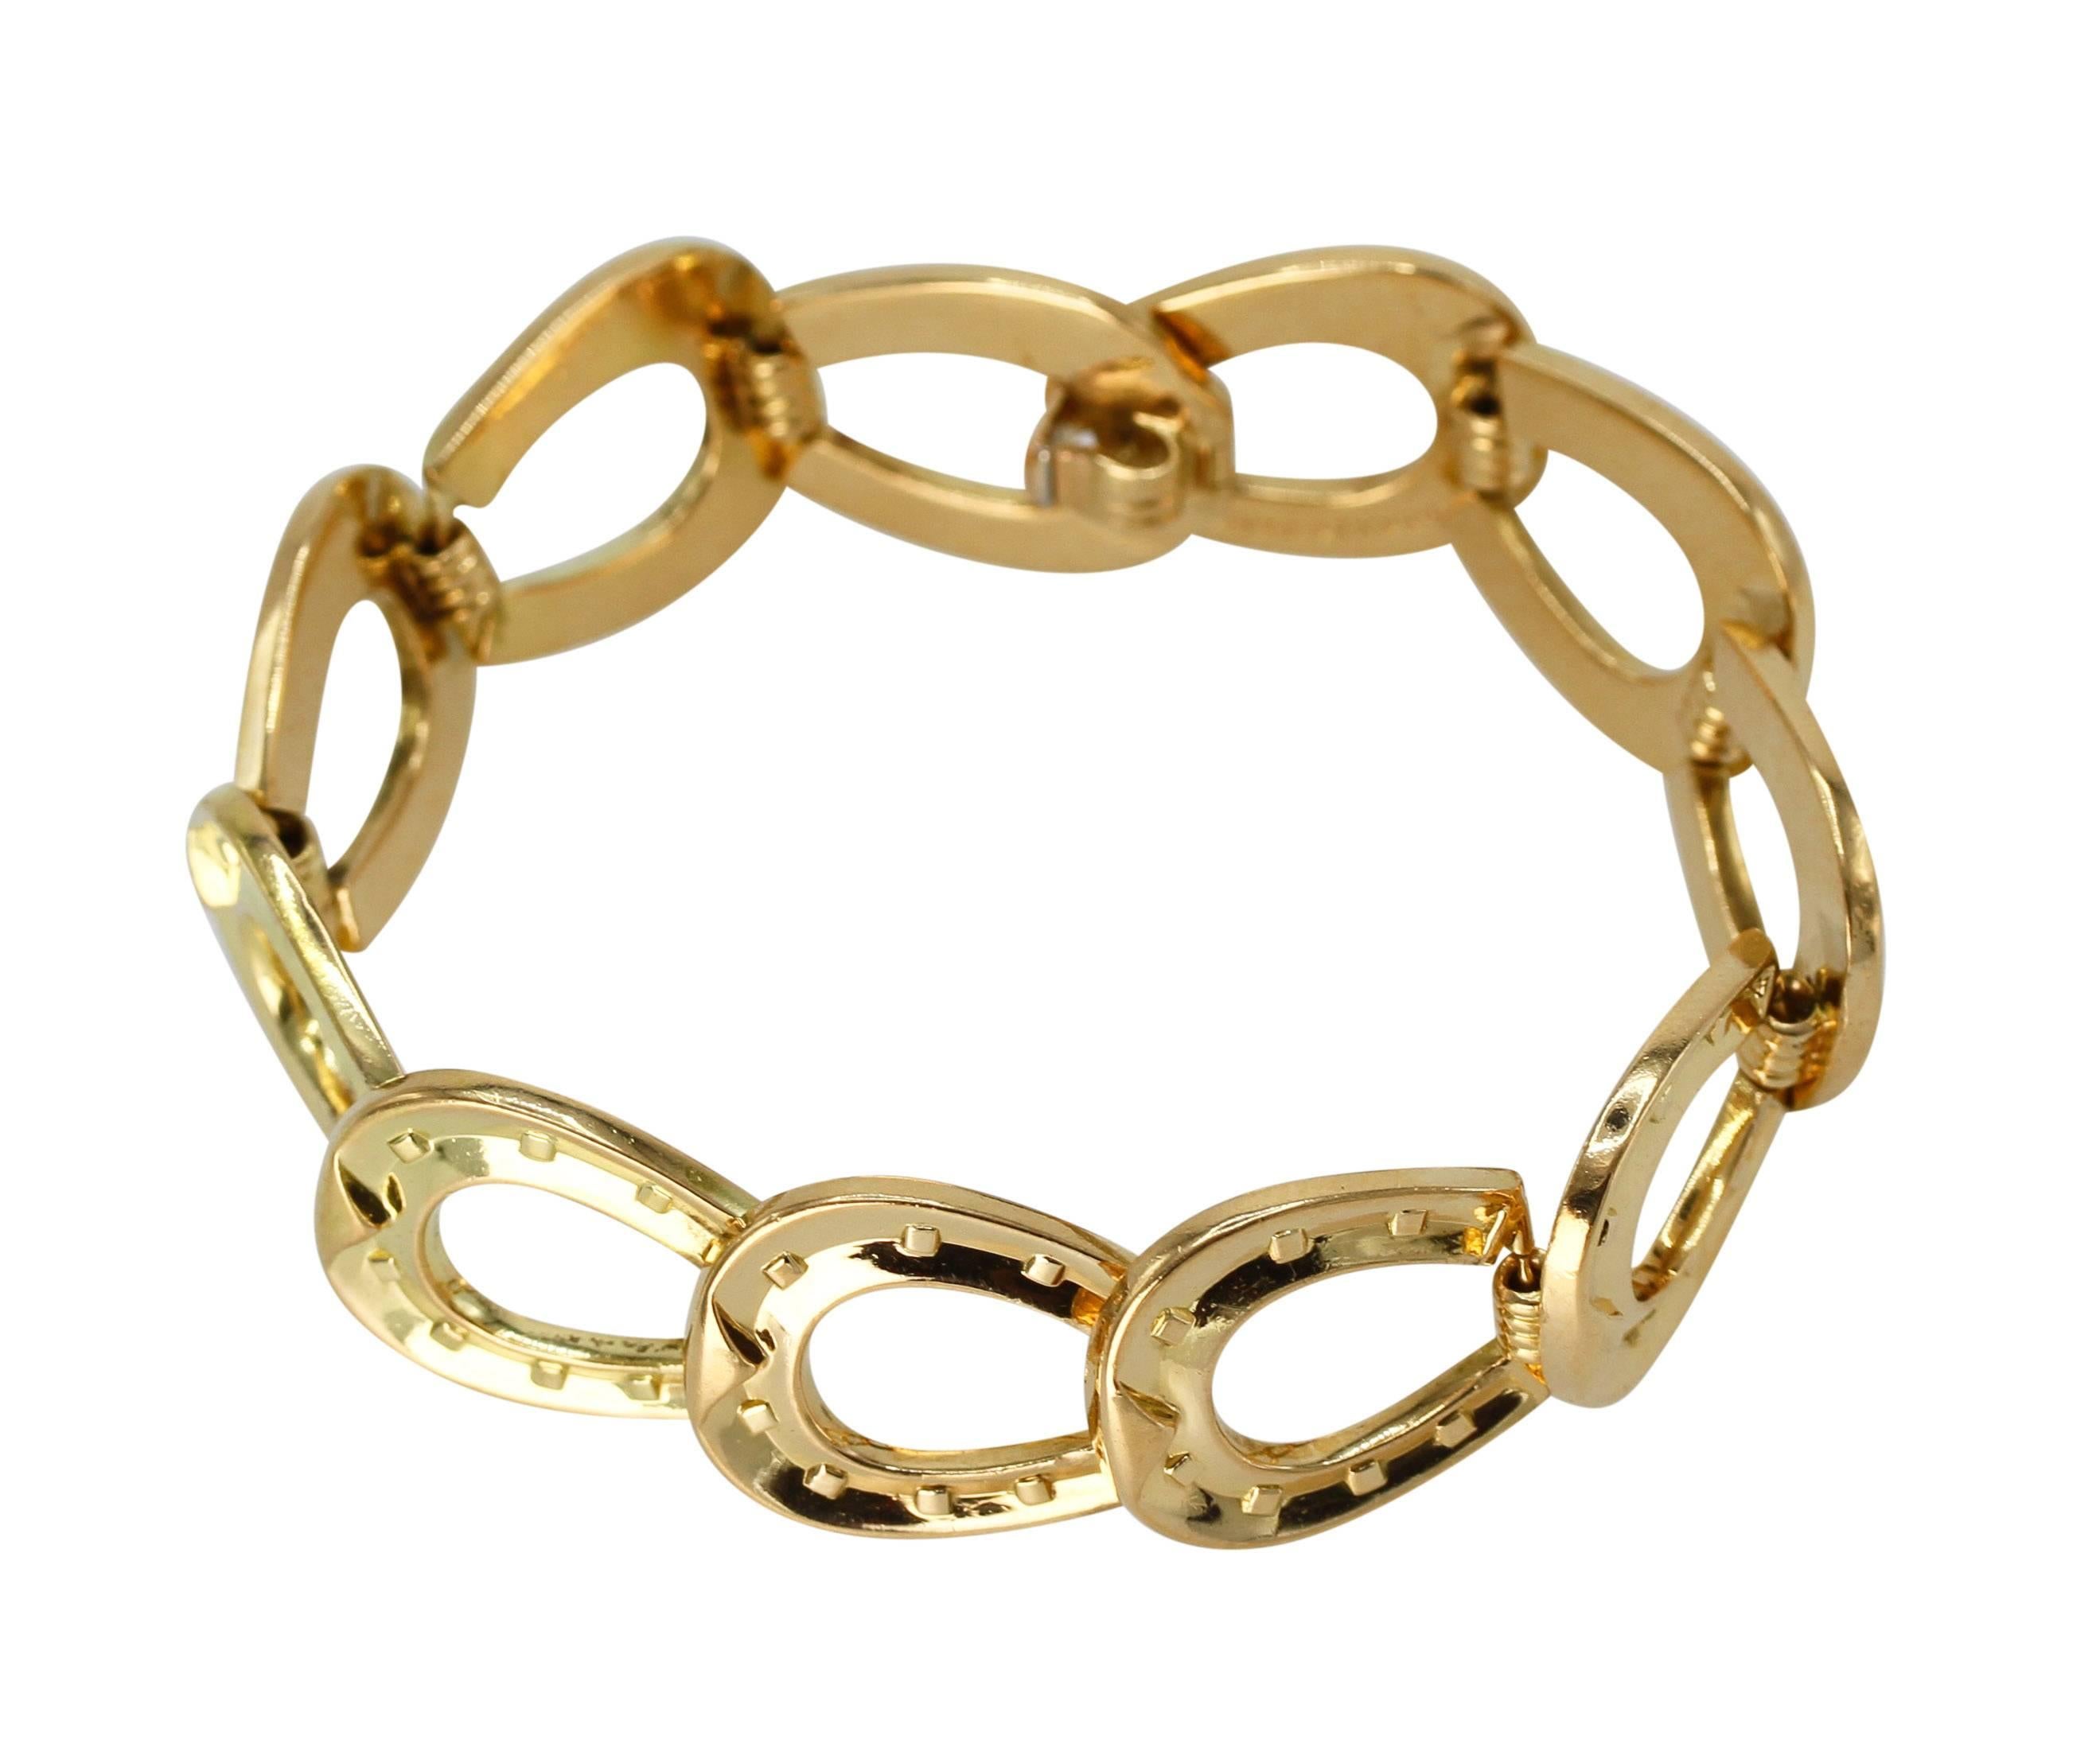 An 18 karat yellow gold horseshoe link bracelet by Hermès, Paris, designed as a series of polished gold horseshoe shaped links, gross weight 54.0 grams, length 7 1/4 inches, width 5/8 inch, signed Hermès, Paris.